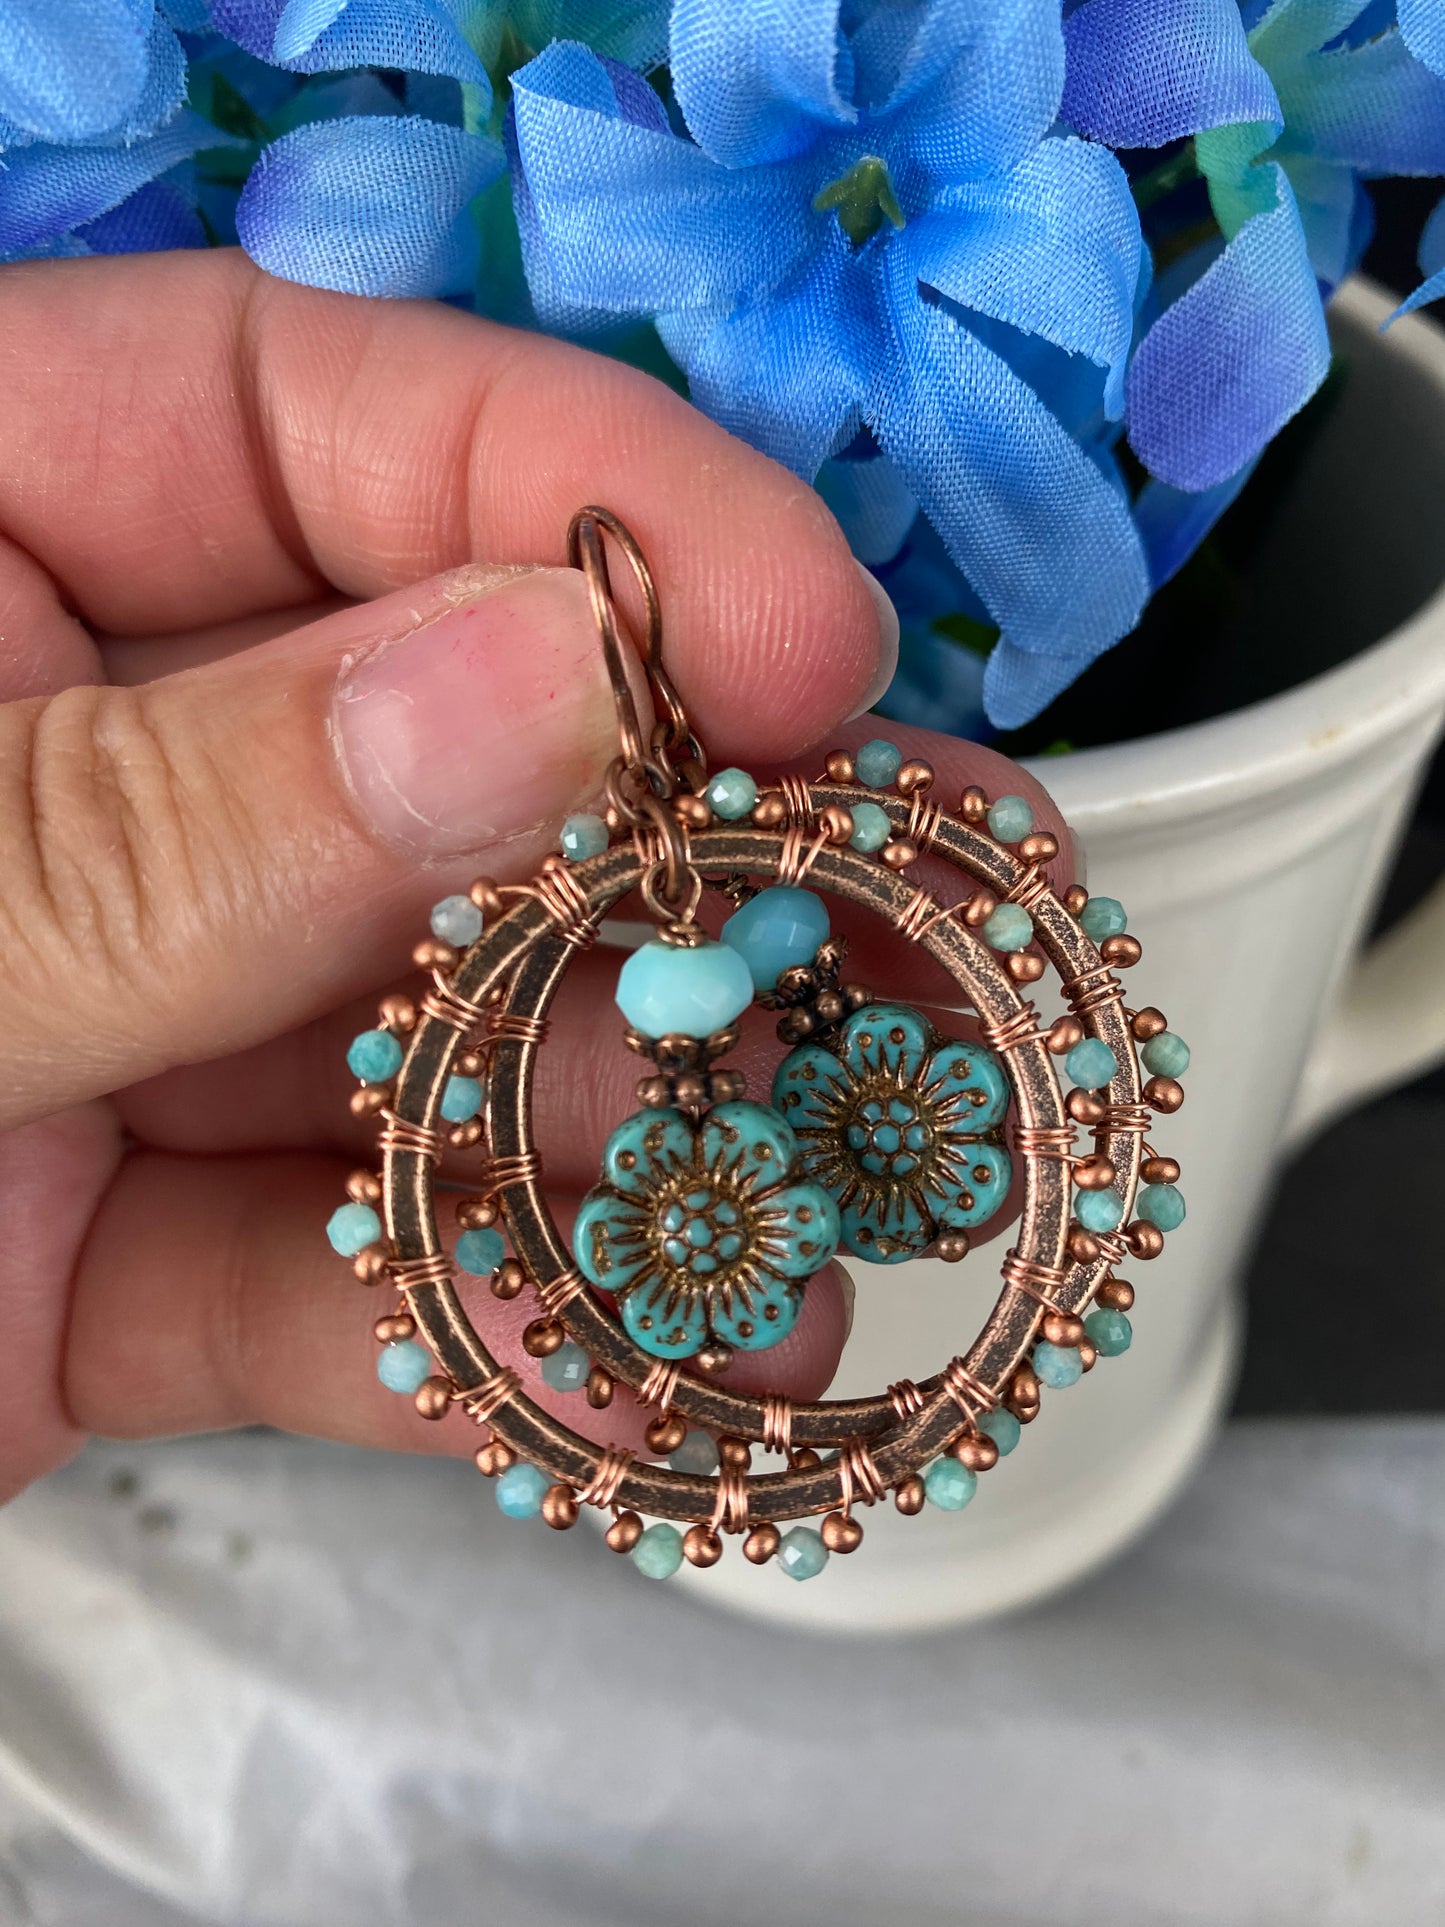 Amazonite stone, turquoise Czech glass flowers, copper metal hoops, wire wrapped, earrings